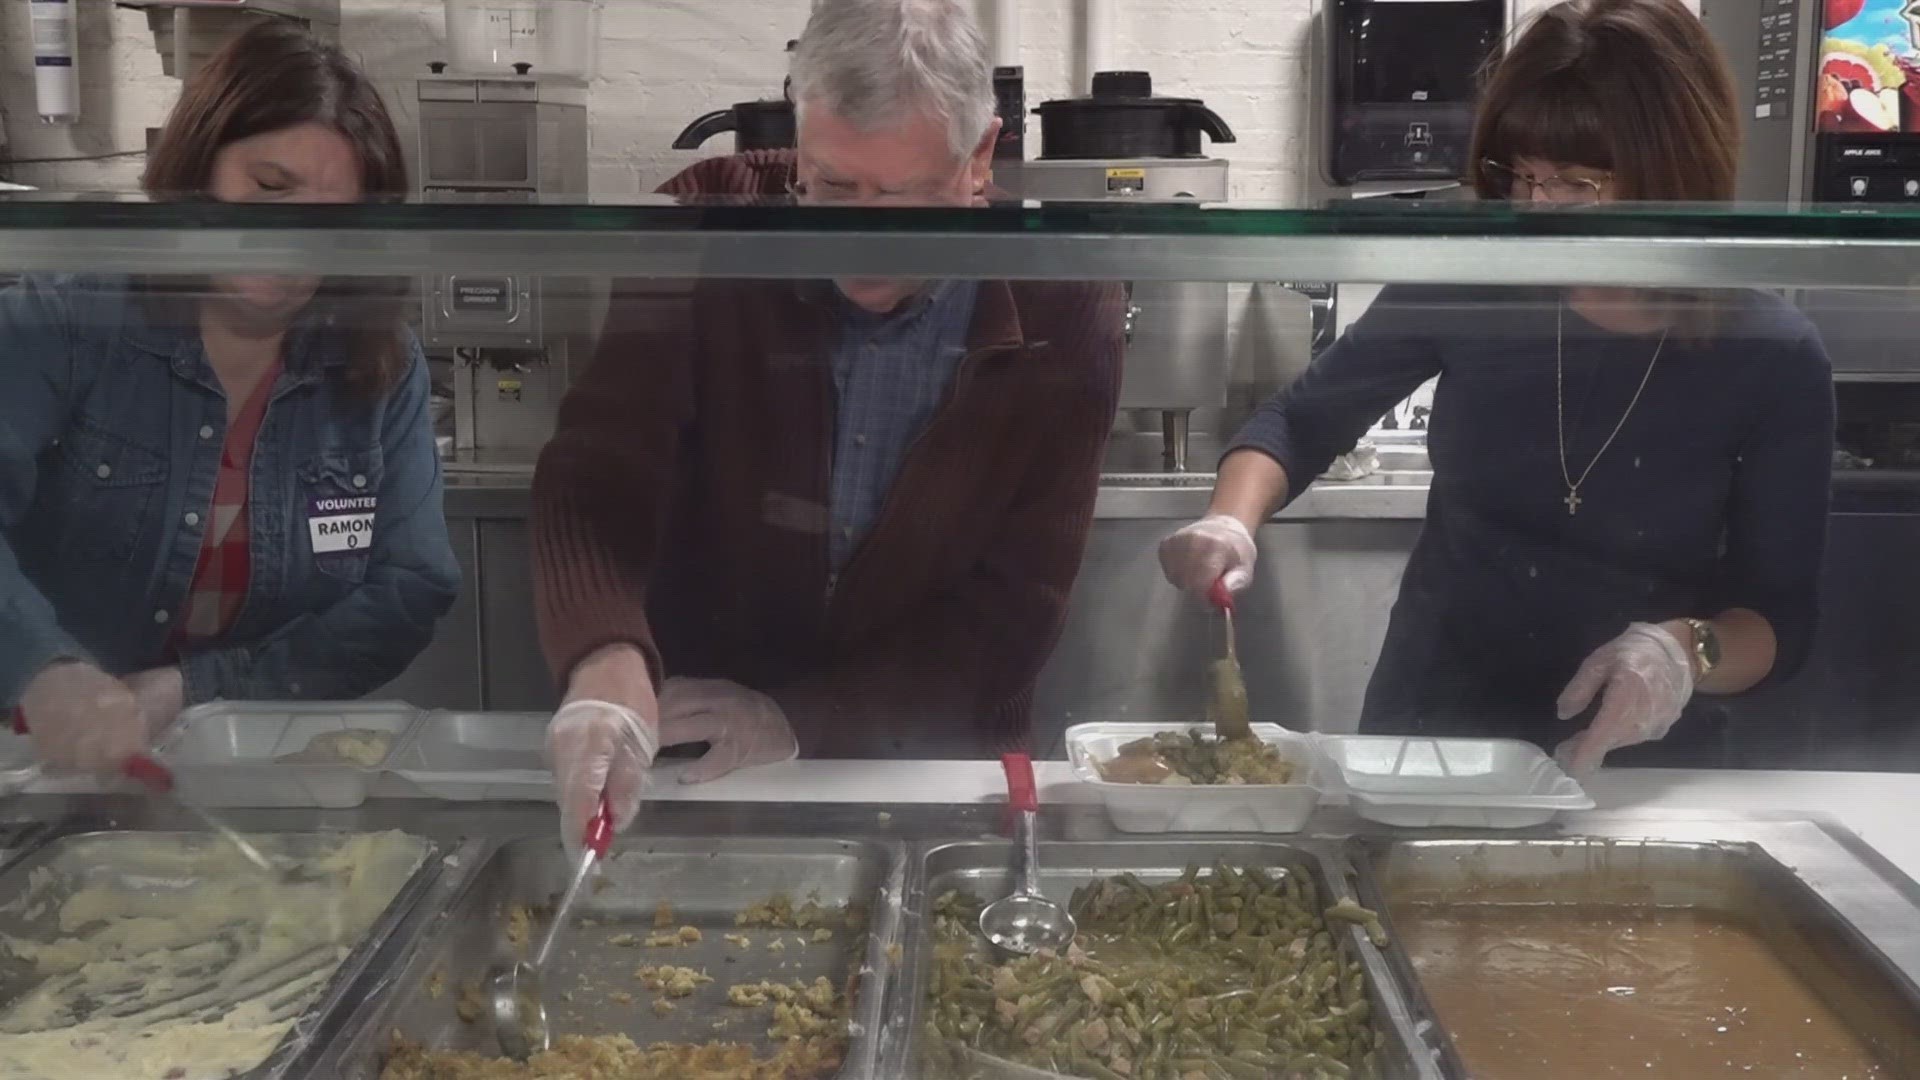 KARM opens its doors on Thanksgiving to serve a warm meal for people in need.